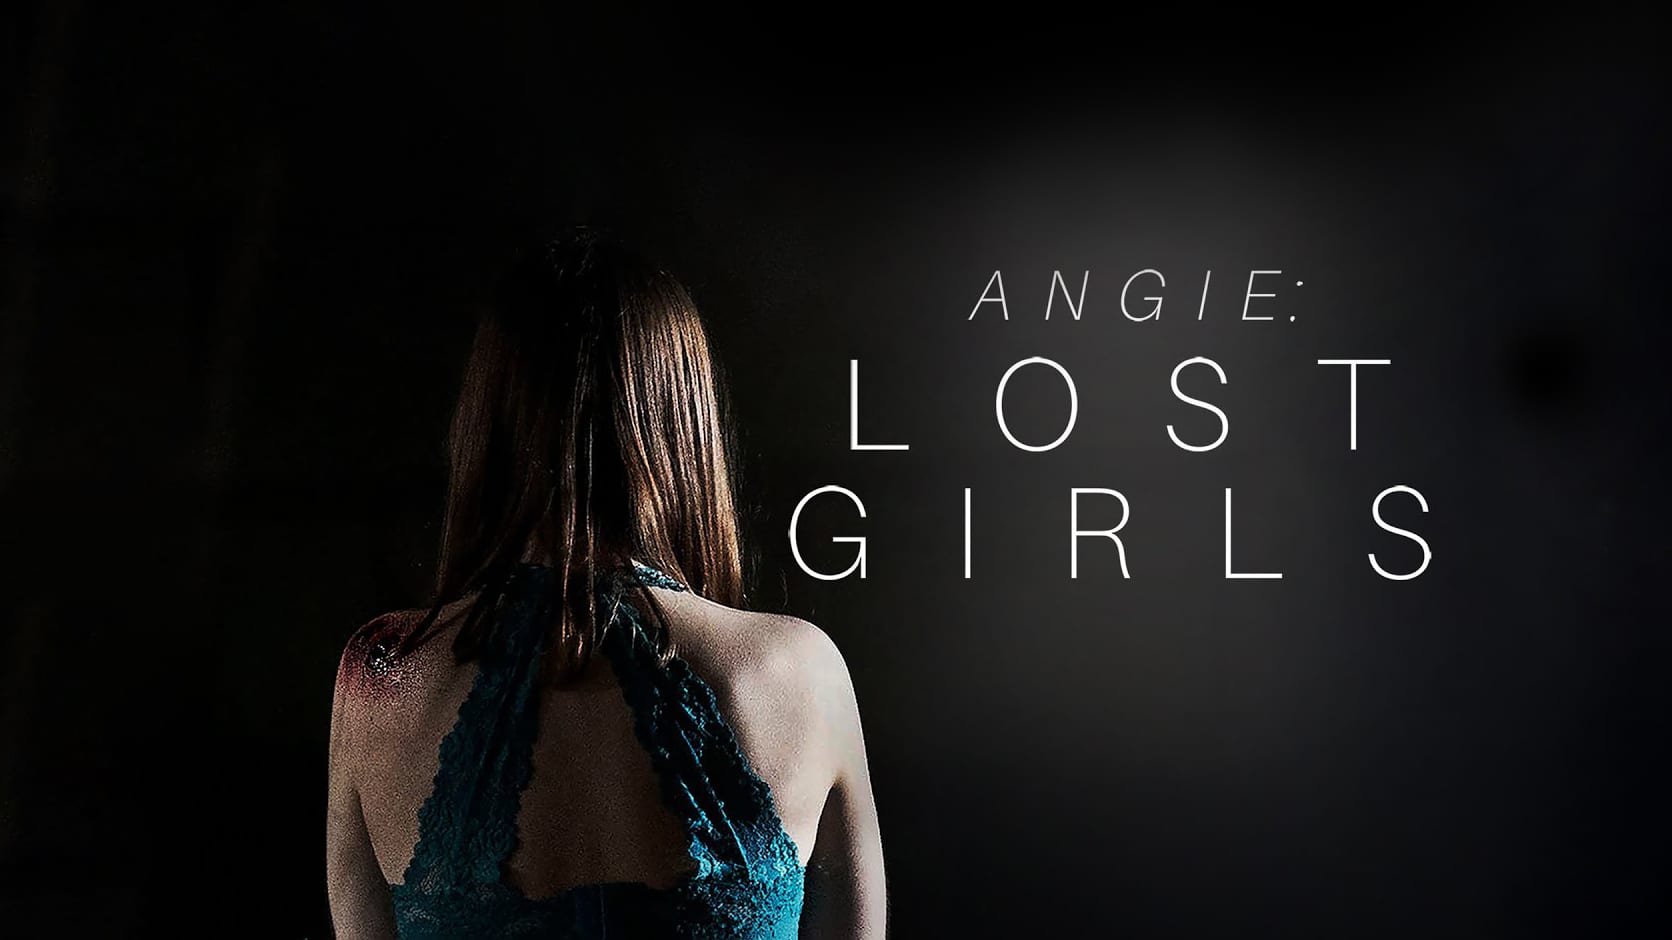 Artists For Change, Inc., will have a free virtual screening of “Angie: Lost Girls” on July 30th for the ‘World Day Against Trafficking in Persons’ event.